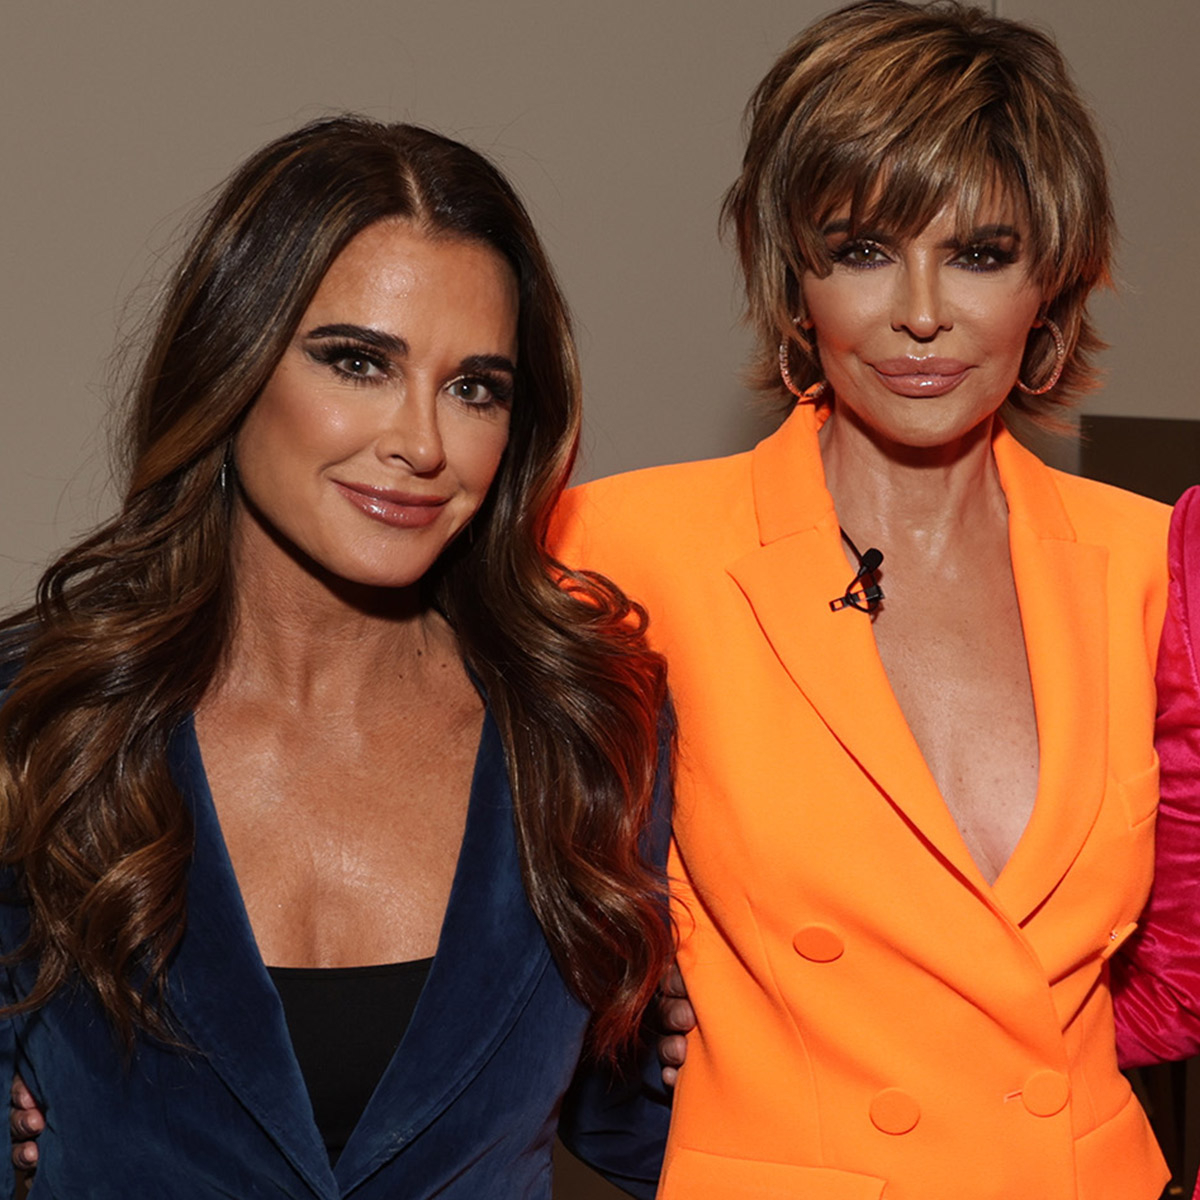 How Kyle Richards Feels About Lisa Rinna’s RHOBH Departure